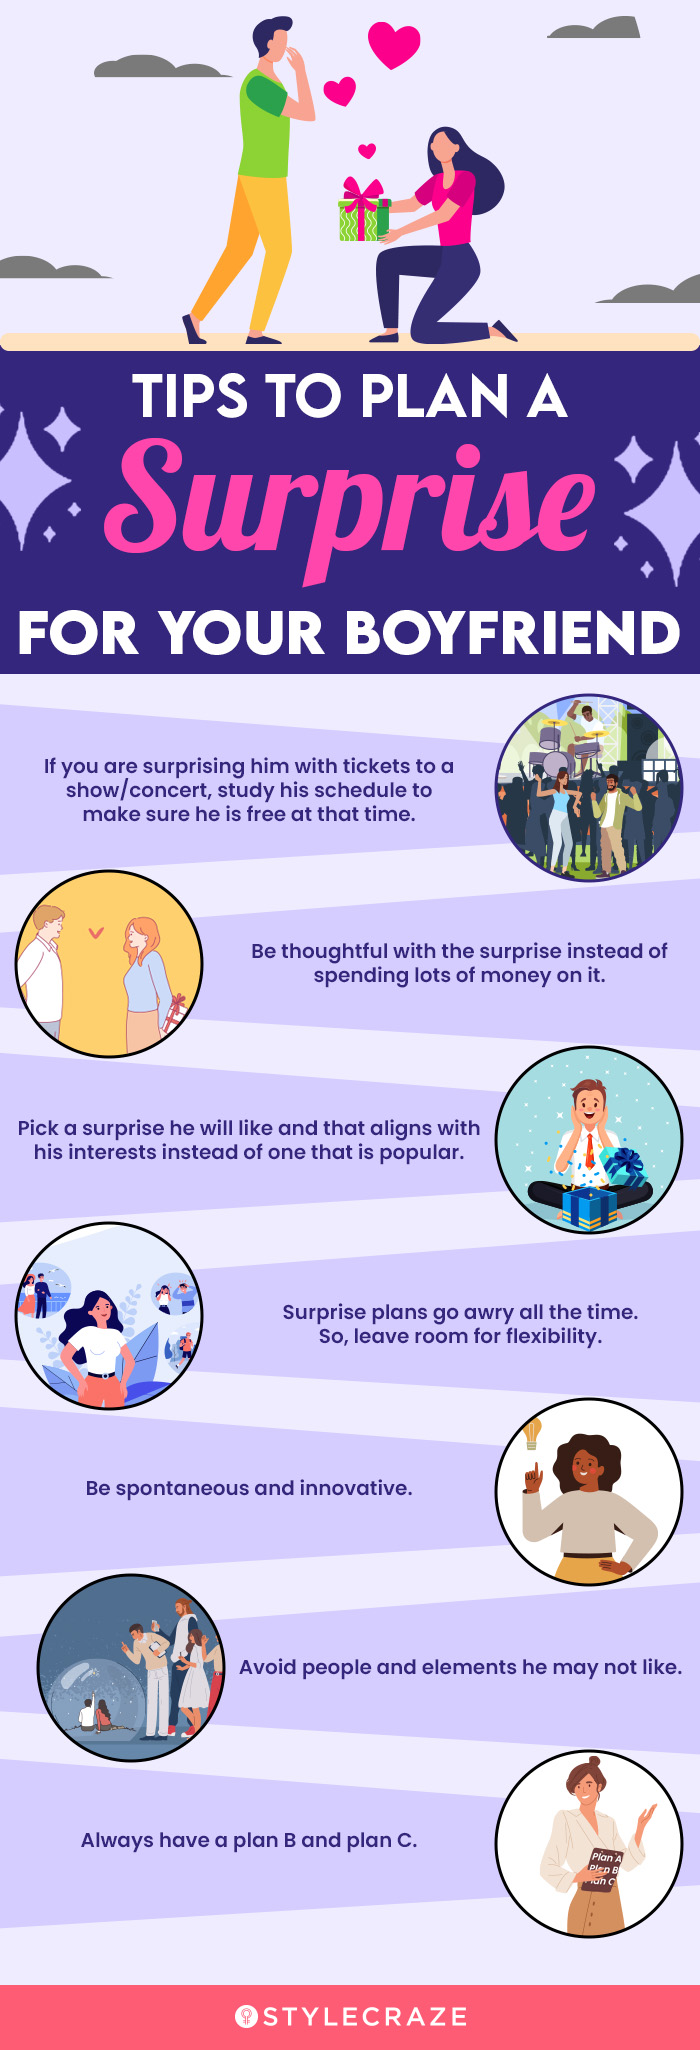 tips to plan a surprise for your boyfriend (infographic)